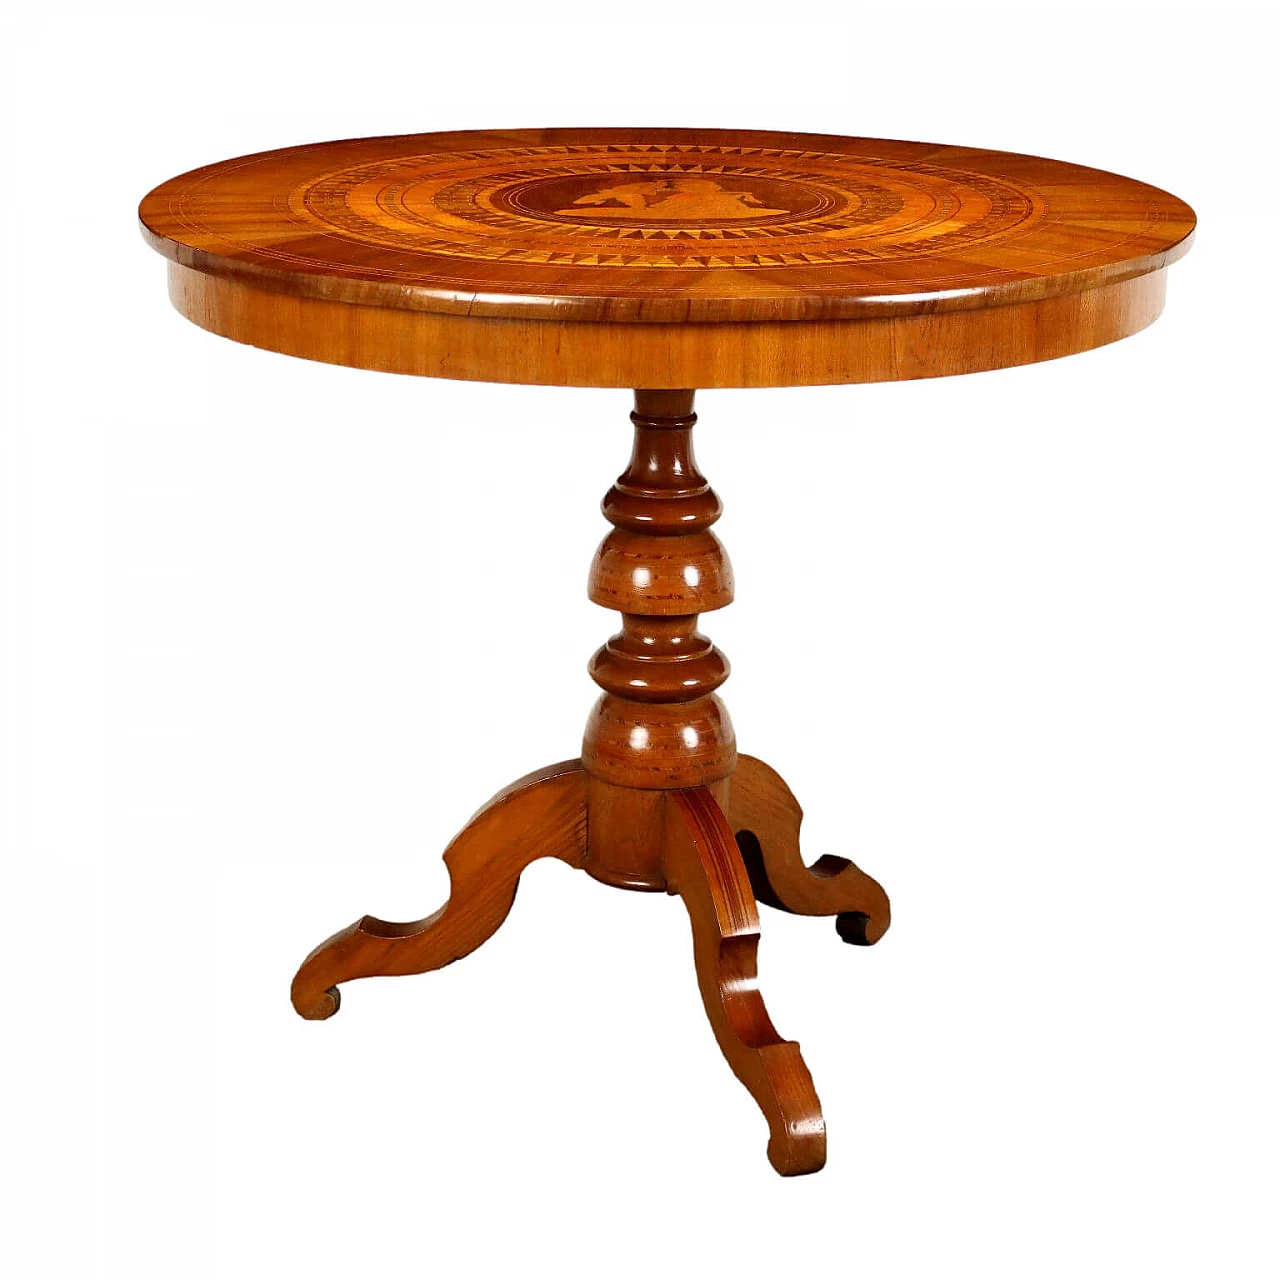 Rolo round inlaid wood table, mid-19th century 1